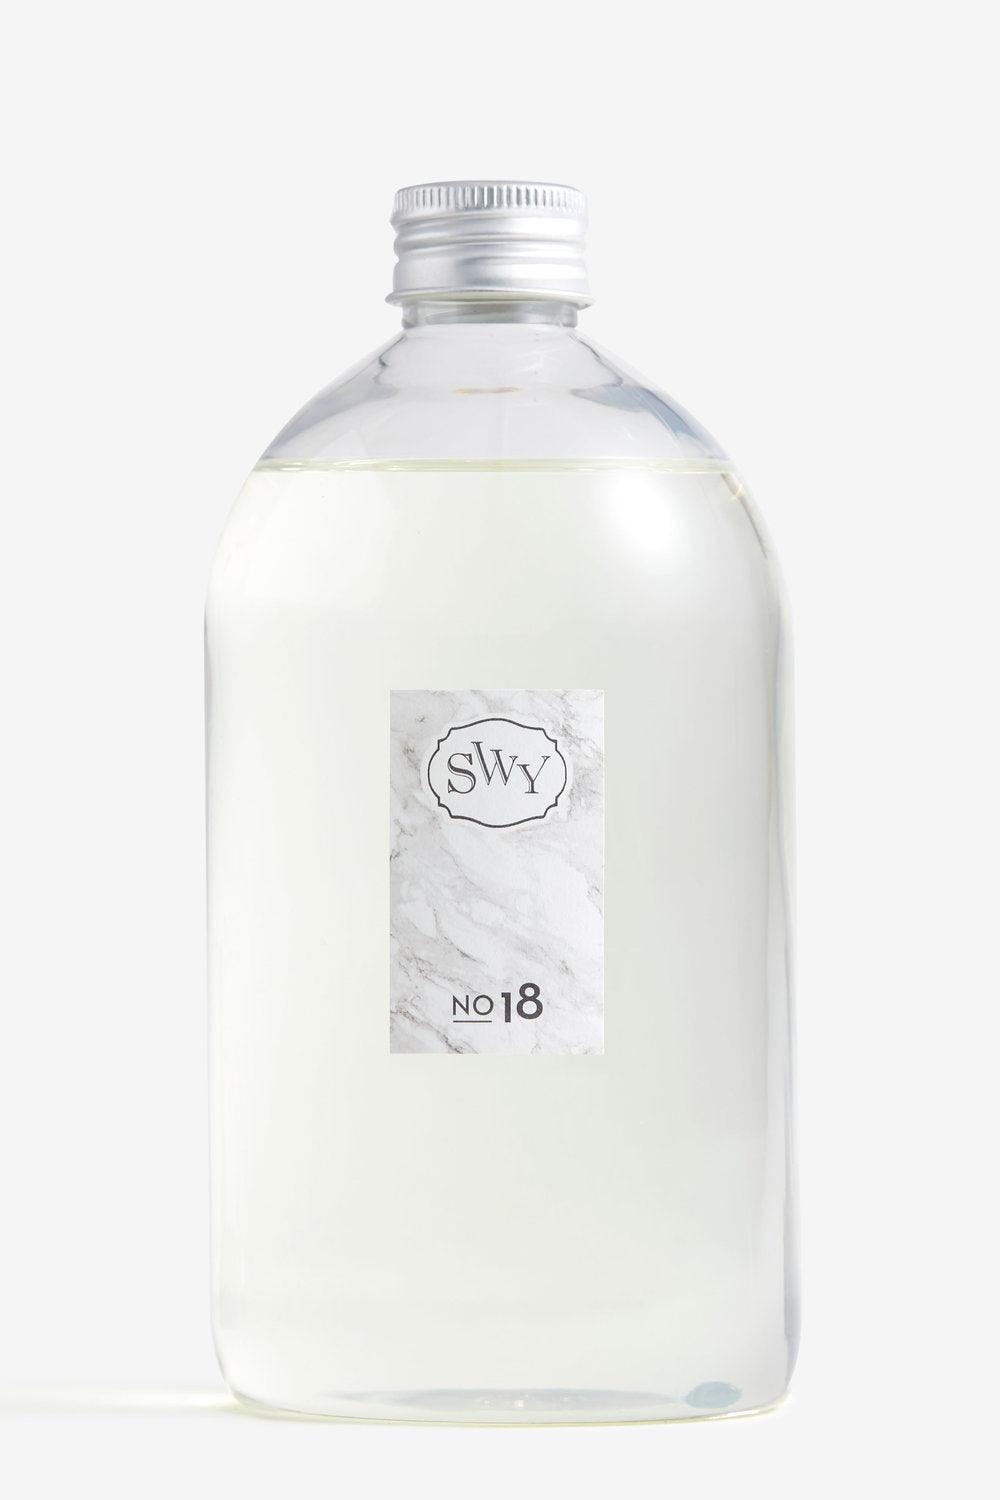 Reeds Diffuser – No.18 - SWY - Scent With You